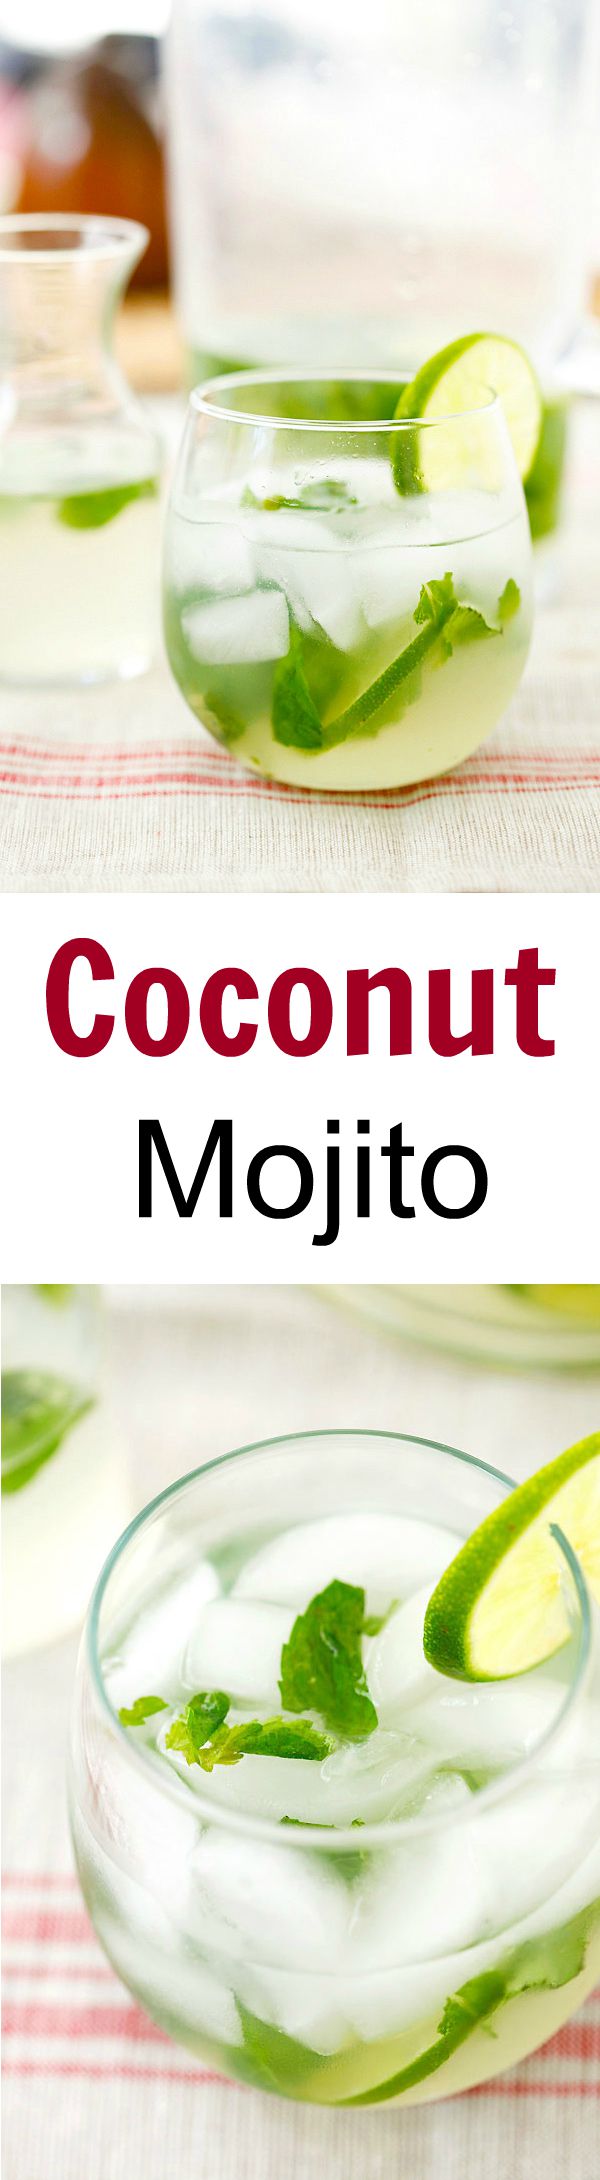 Coconut Mojito - Add tropical flavor to your regular mojito with this easy, healthy and refreshing coconut mojito recipe that takes only 10 mins to make! | rasamalaysia.com